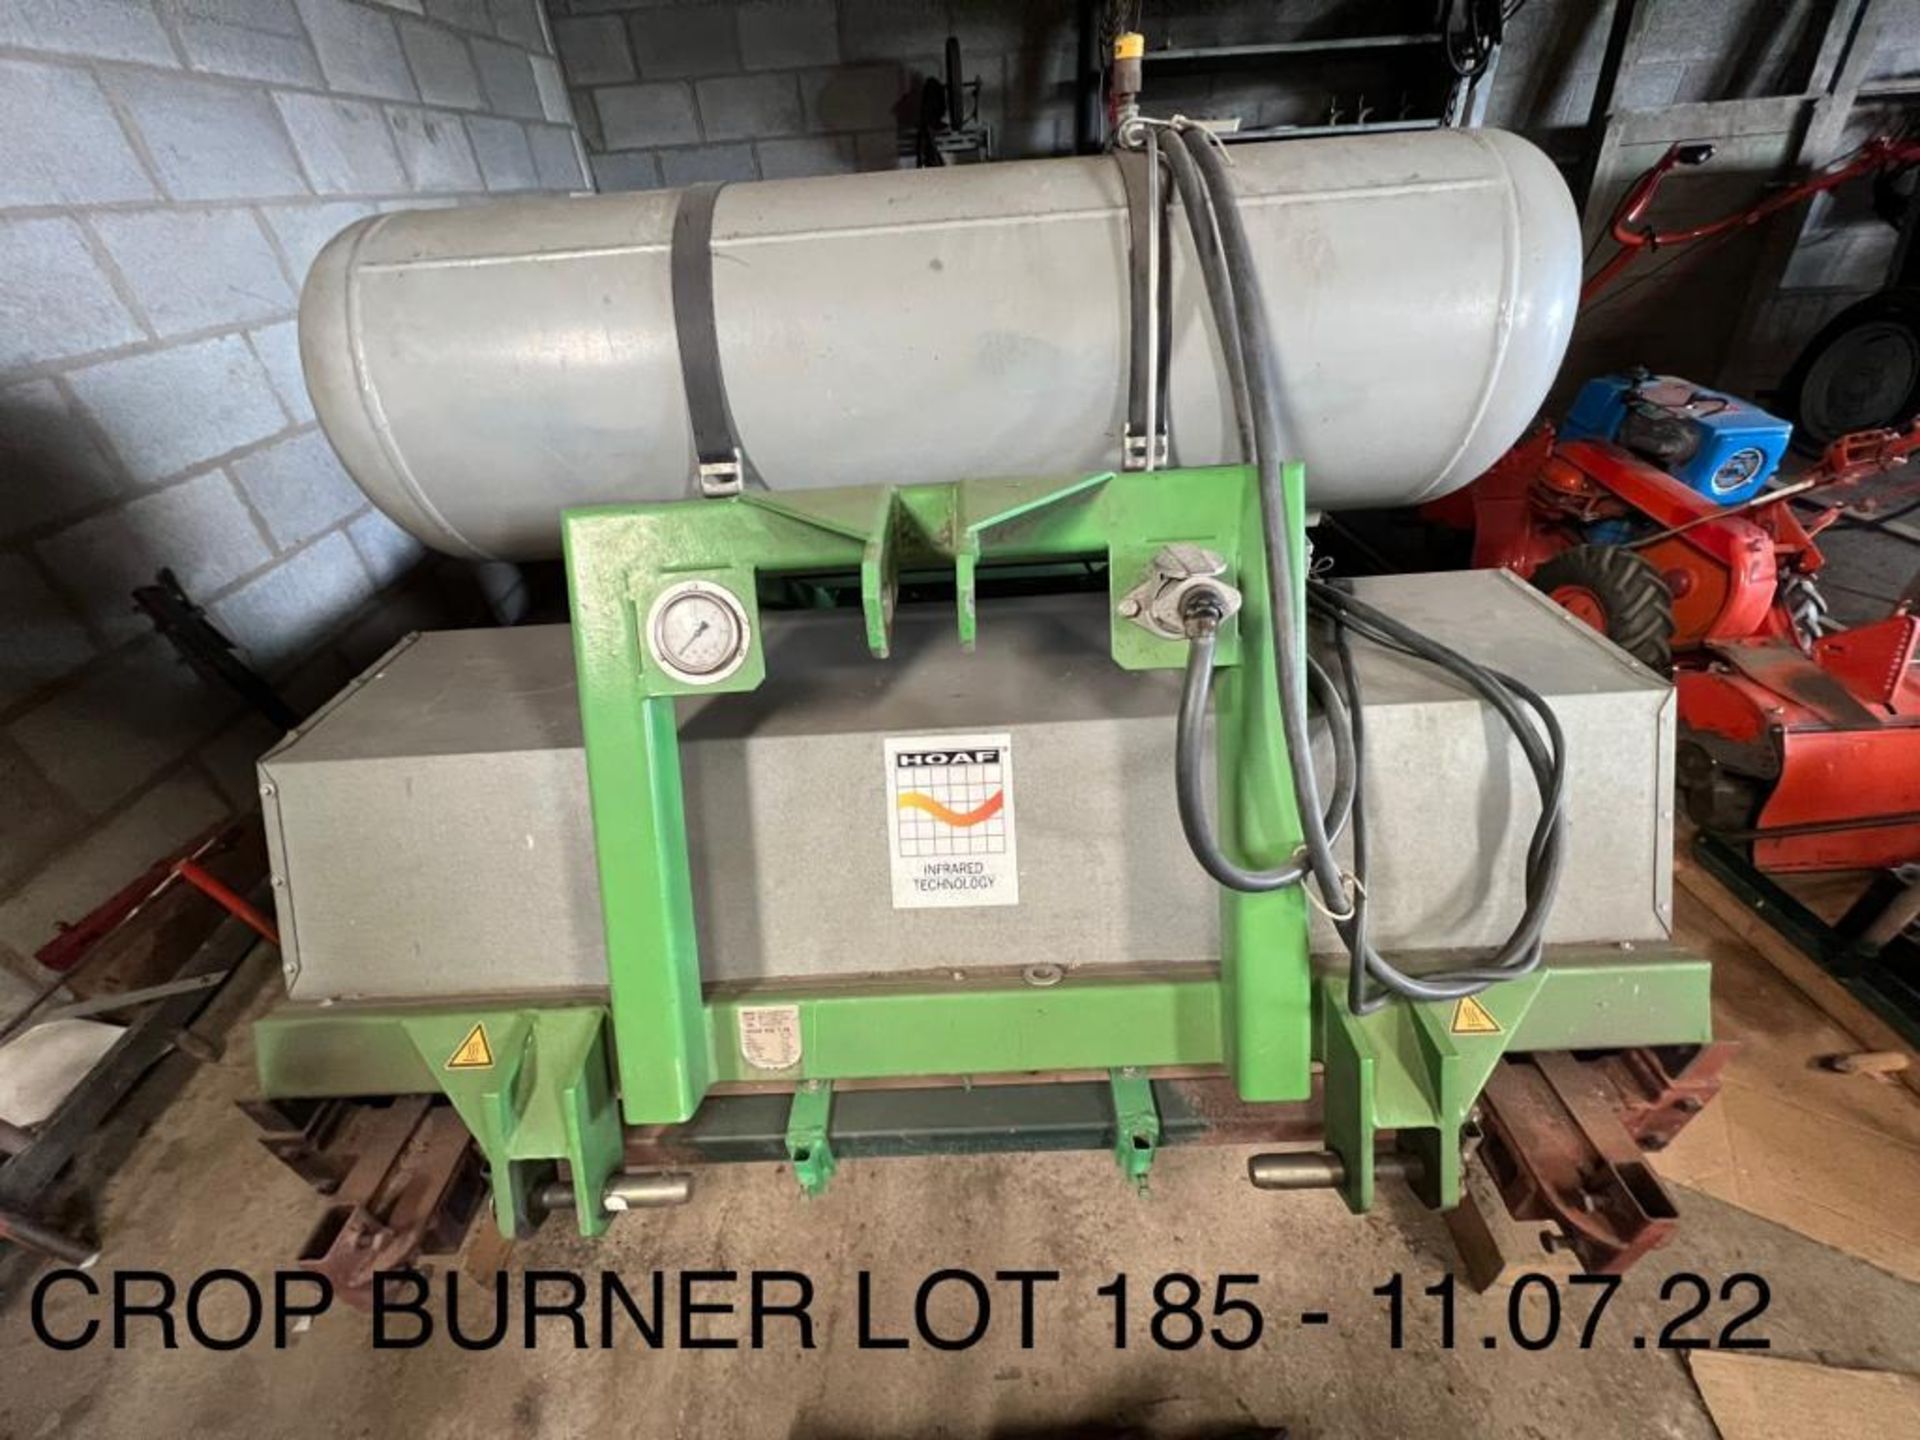 HOAF PROPANE GAS CROP BURNER 54" WIDE & 58" LONG NO VAT COLLECTION FROM MAGULL